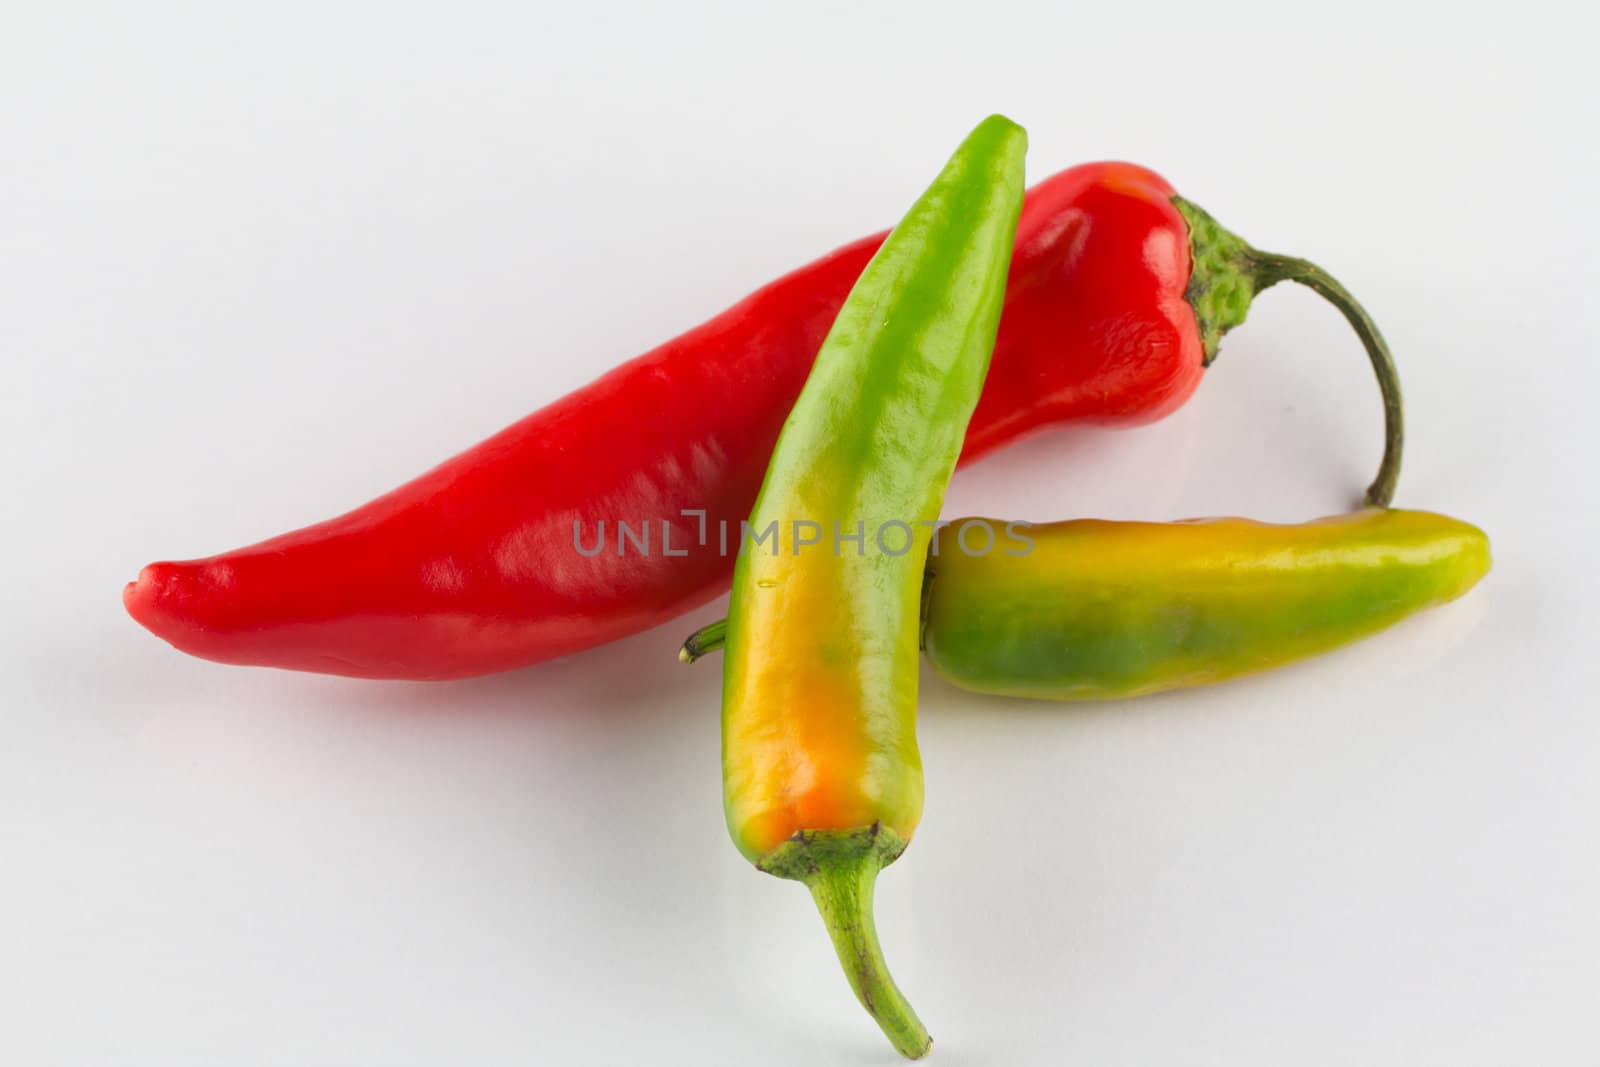 Fiery hot jalapenos peppers